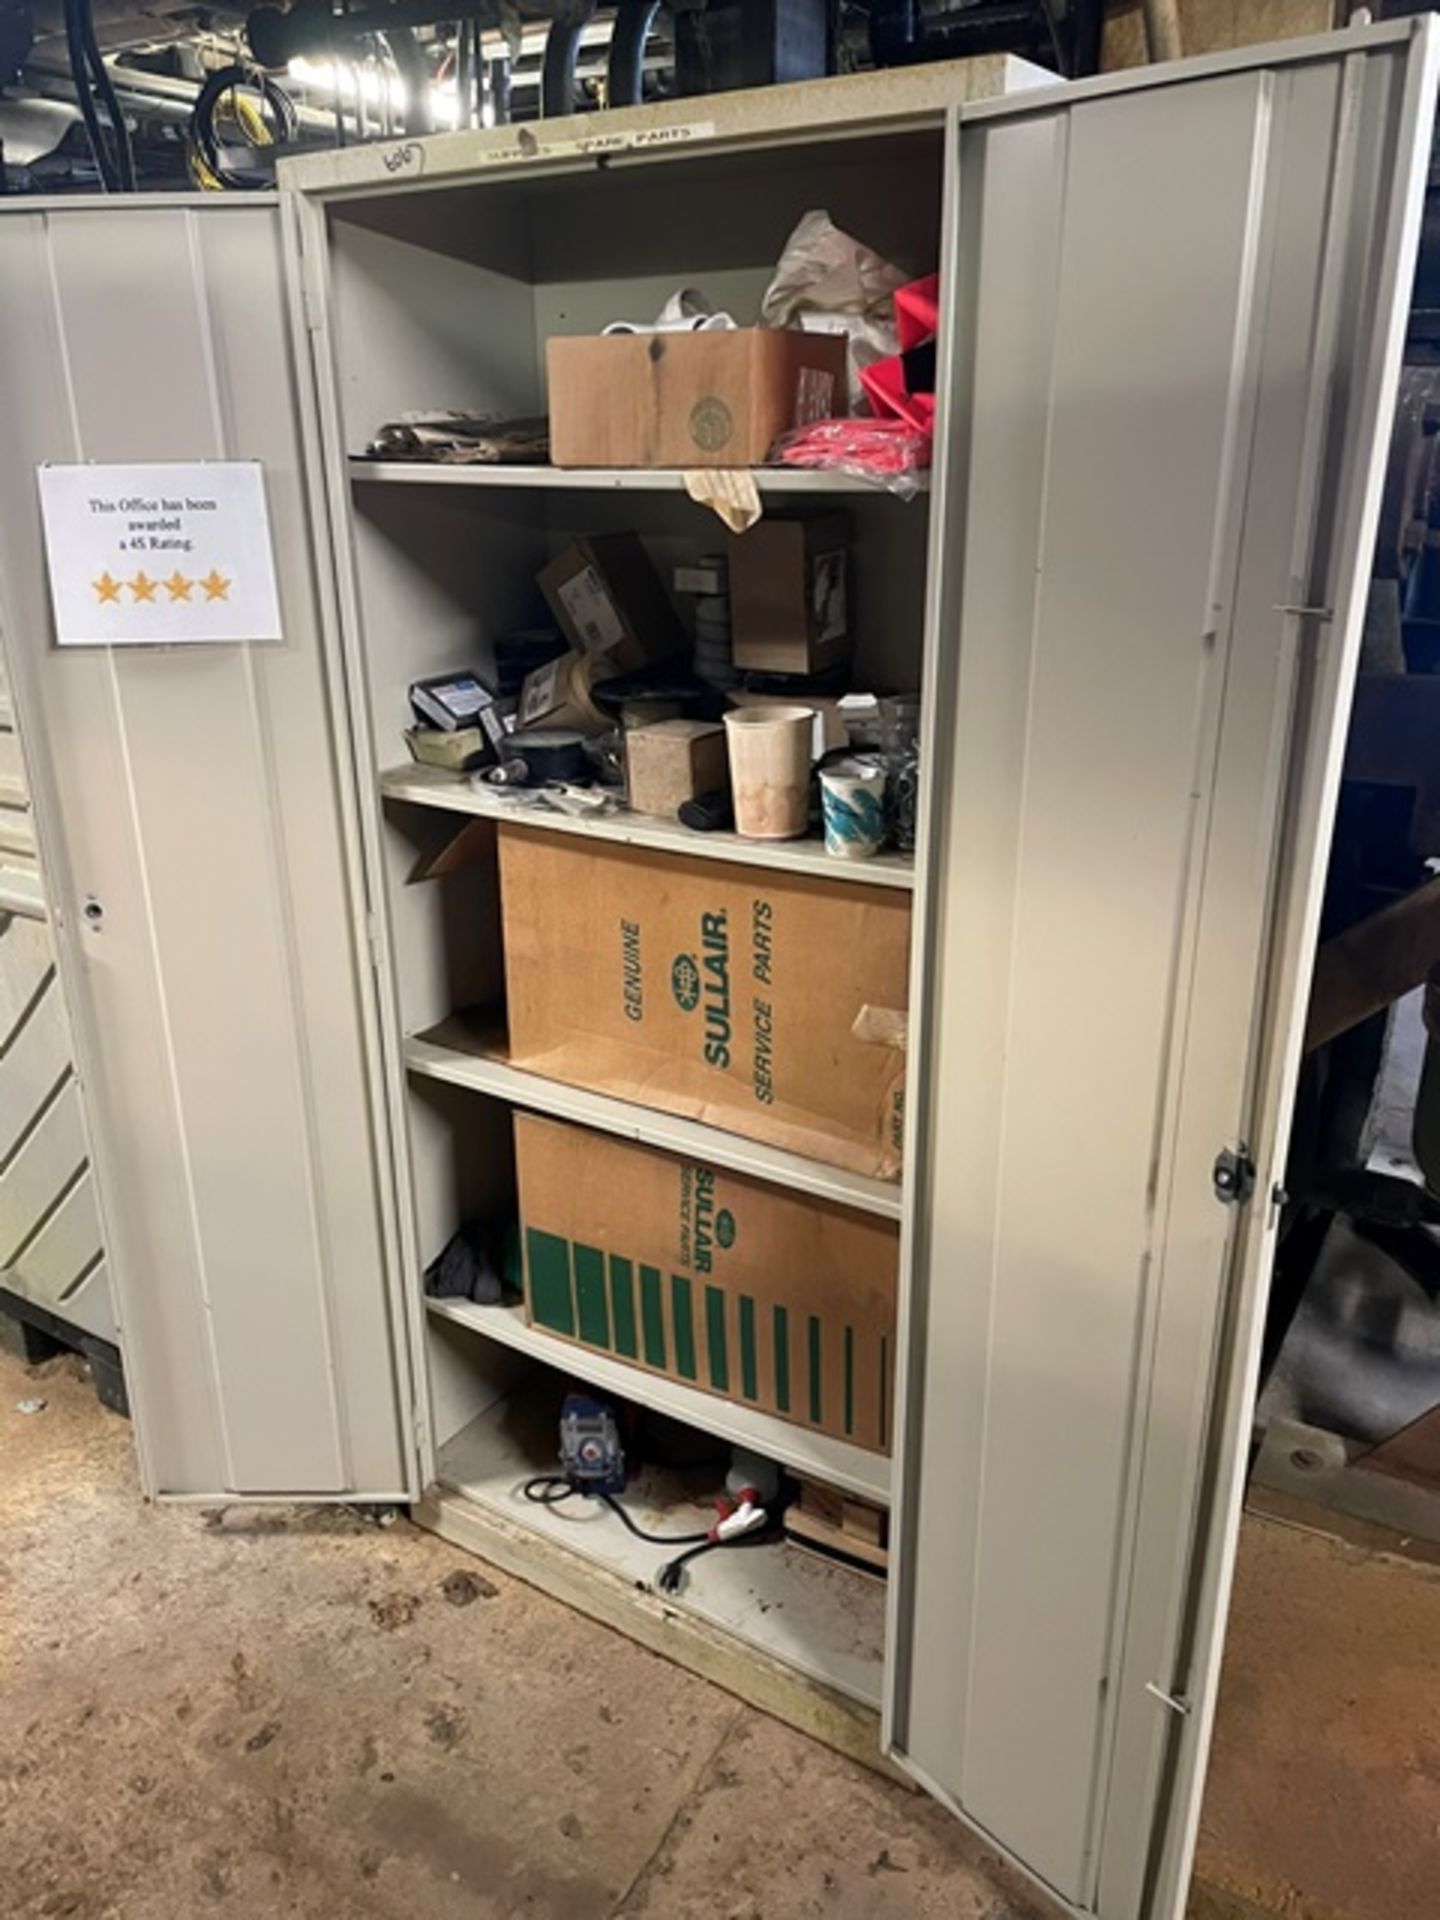 Plant Support - 2-Door Cabinet w/Assorted Sullair Parts, Rigging & Loading Fee: $100 - Image 2 of 2